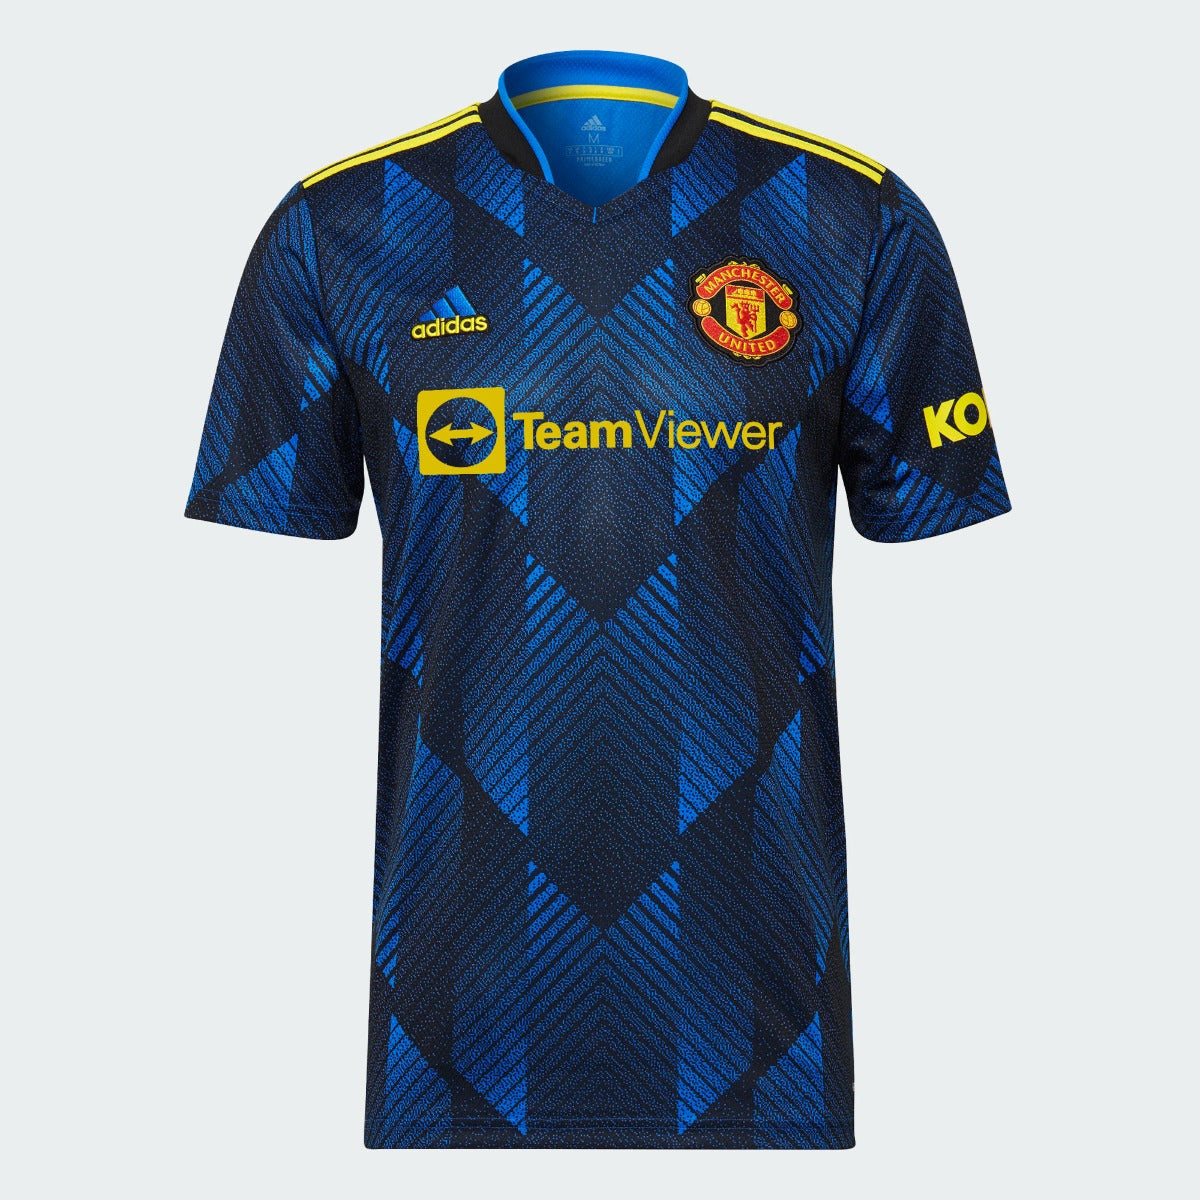 Adidas 2021-22 Manchester United Third Jersey - Black-Royal-Yellow (Front)